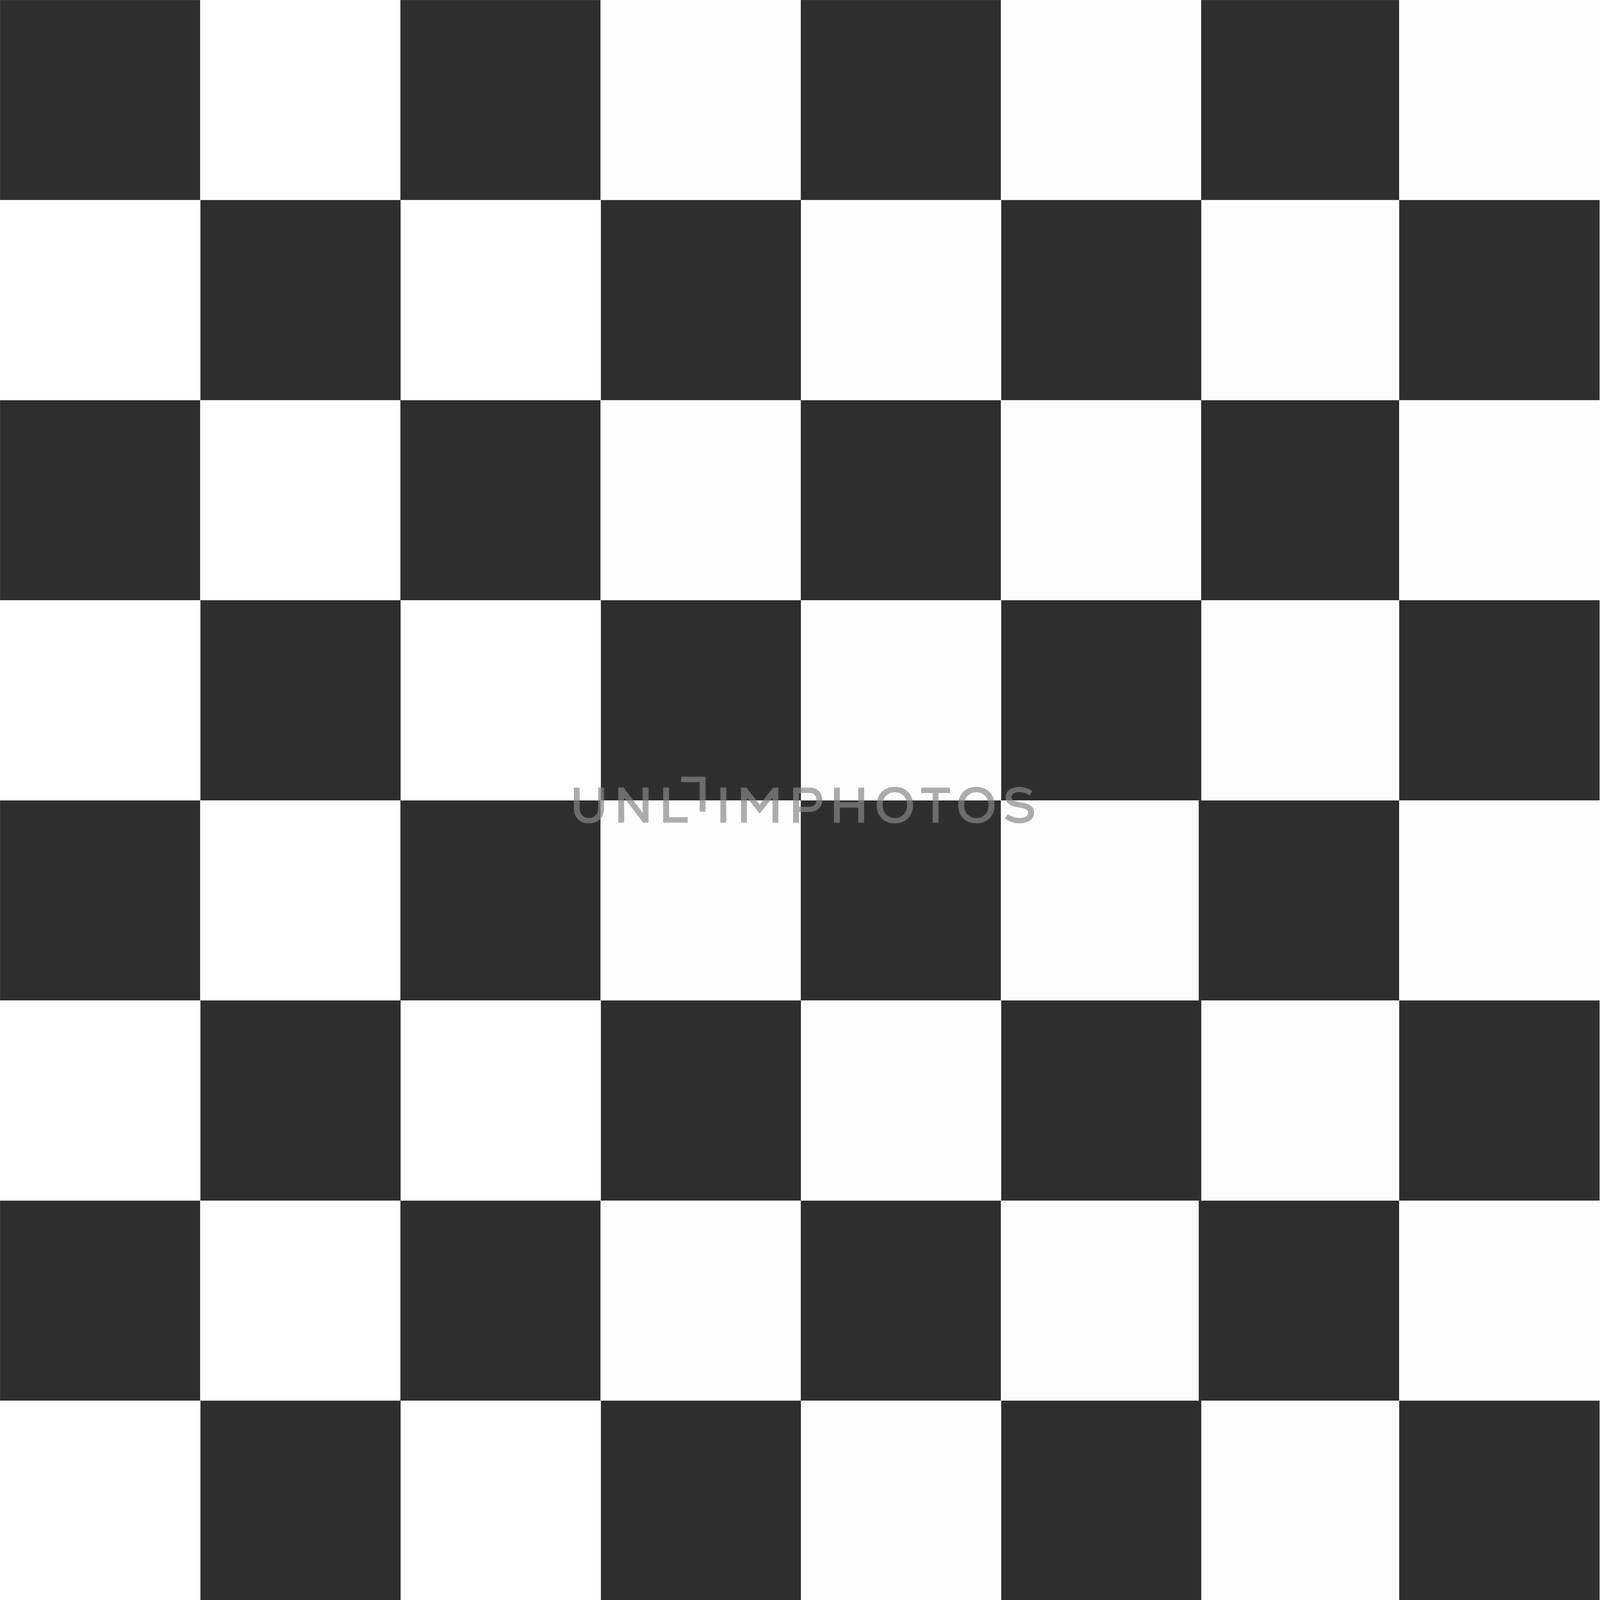 image of usual black and white chess-board